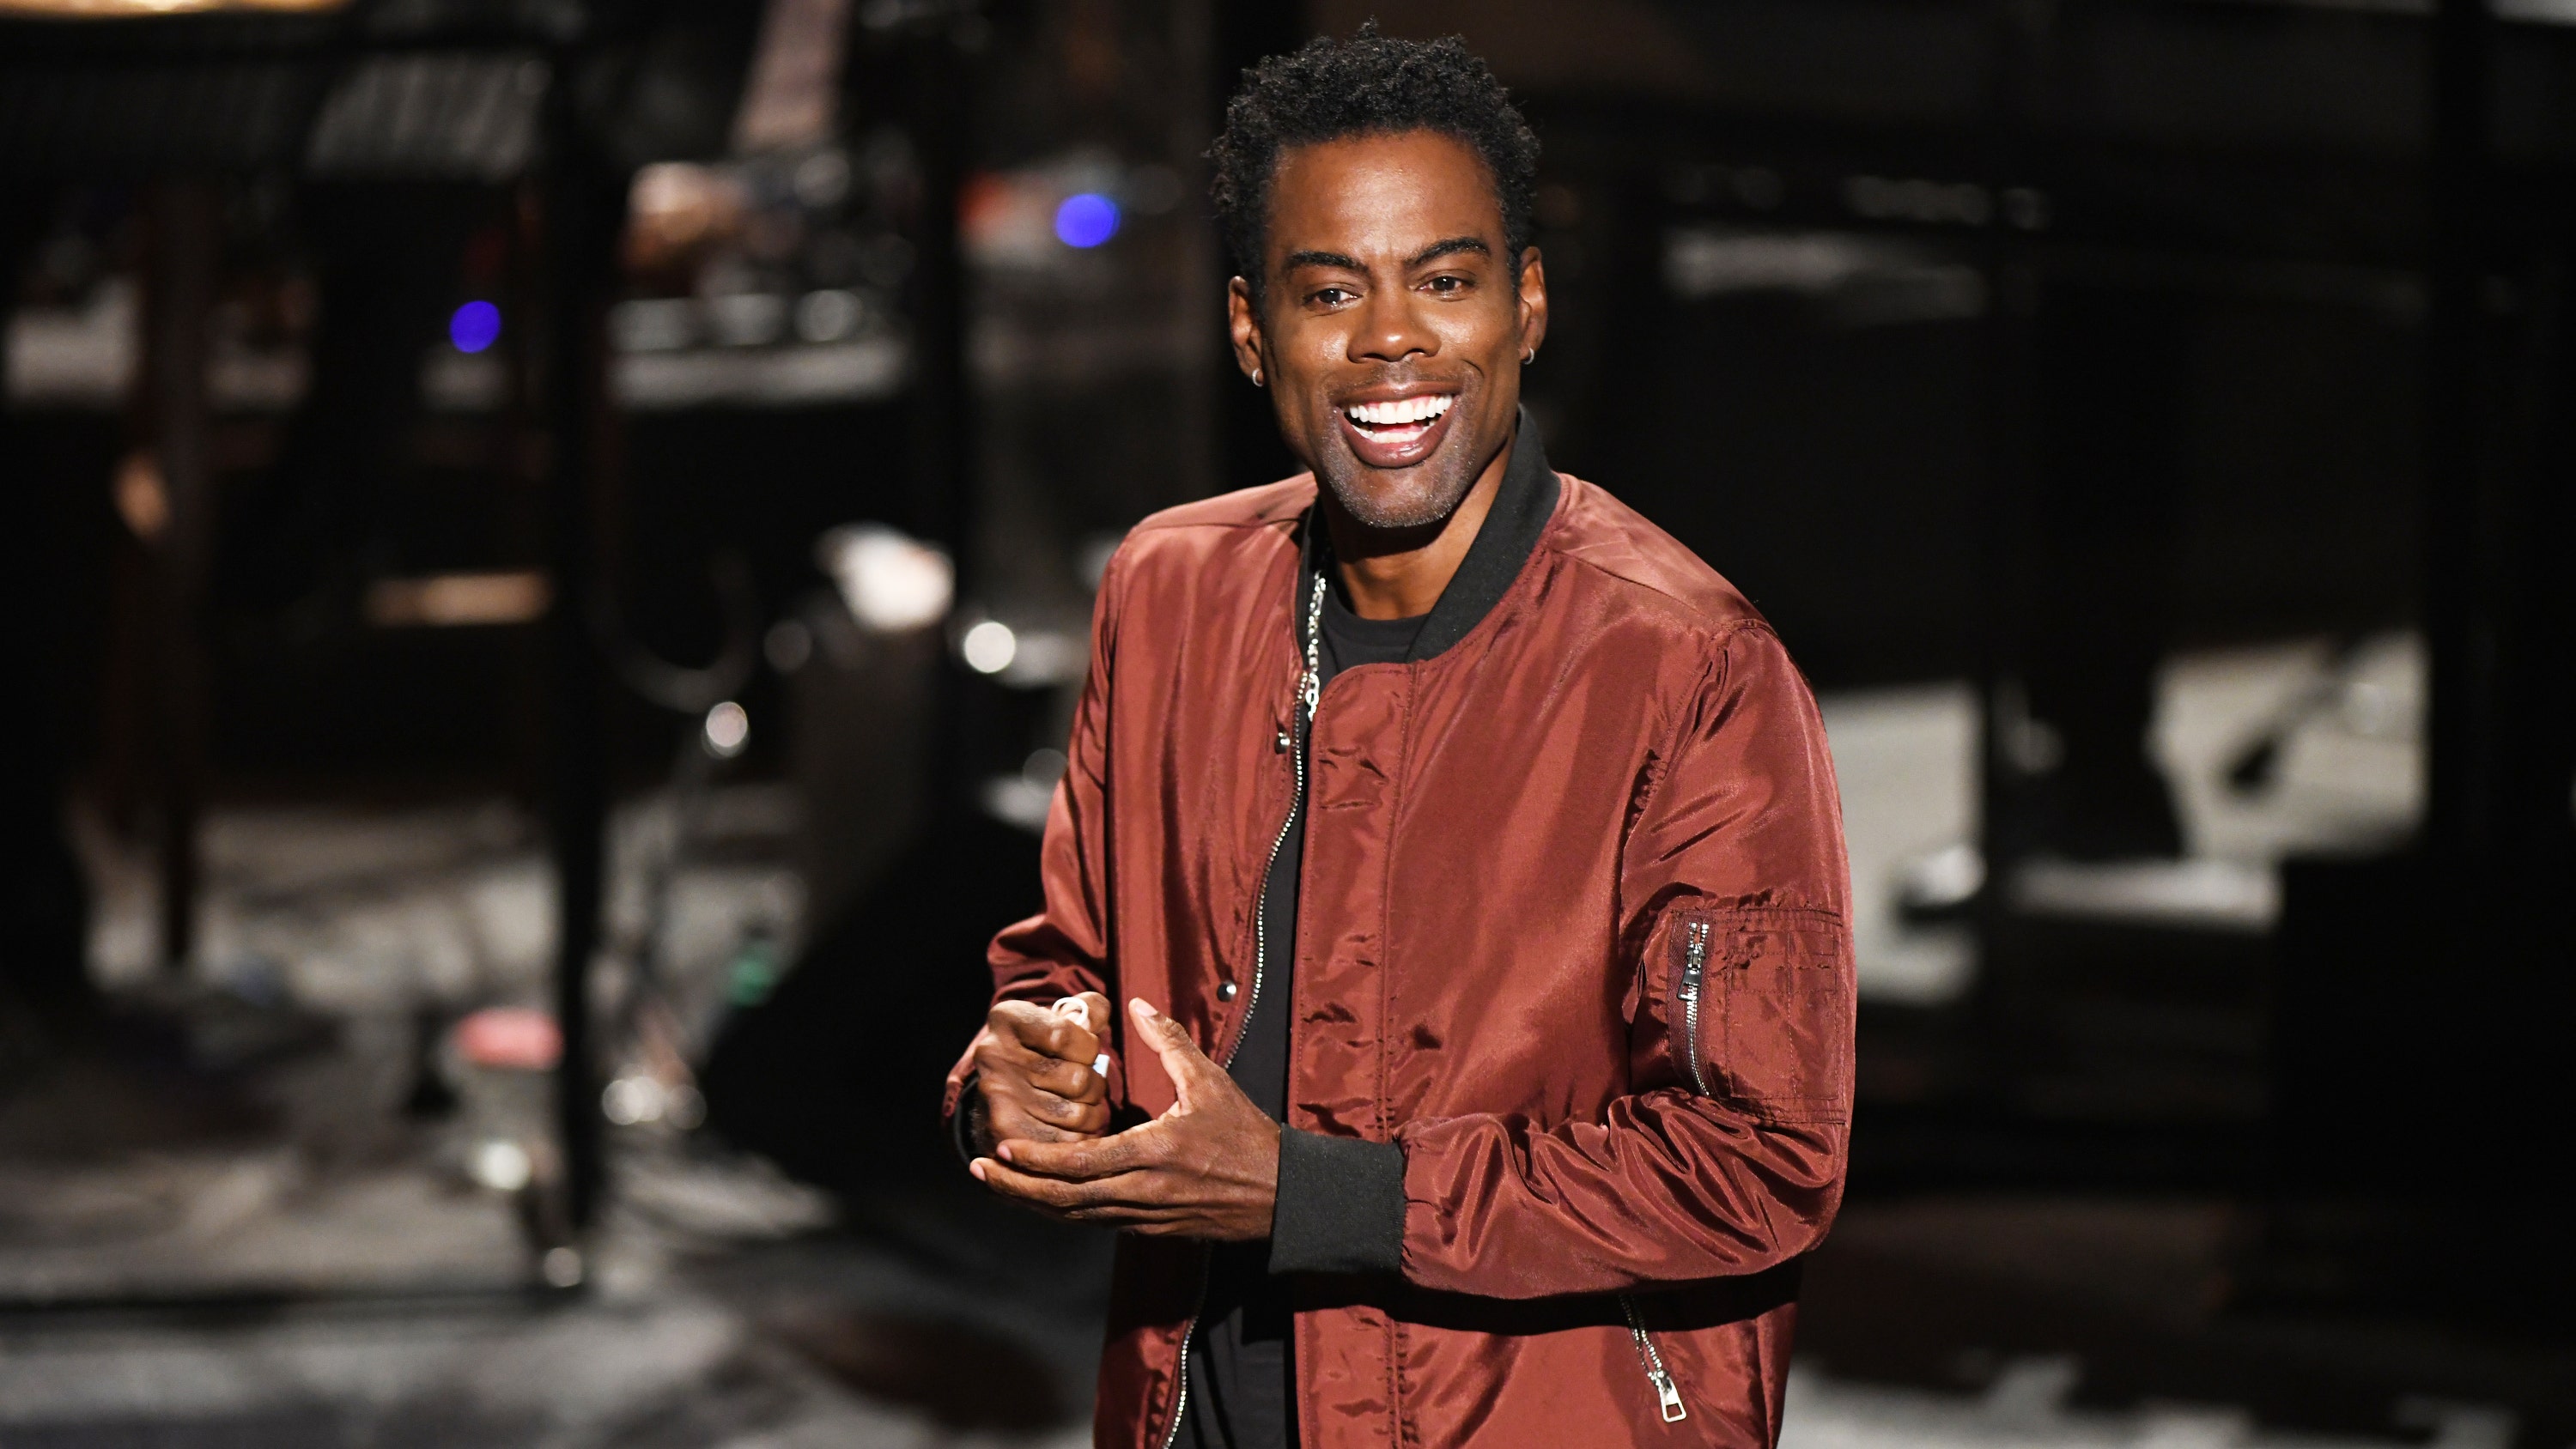 Chris Rock speaks out against cancel culture, says it creates 'unfunny' and 'boring' comedy content